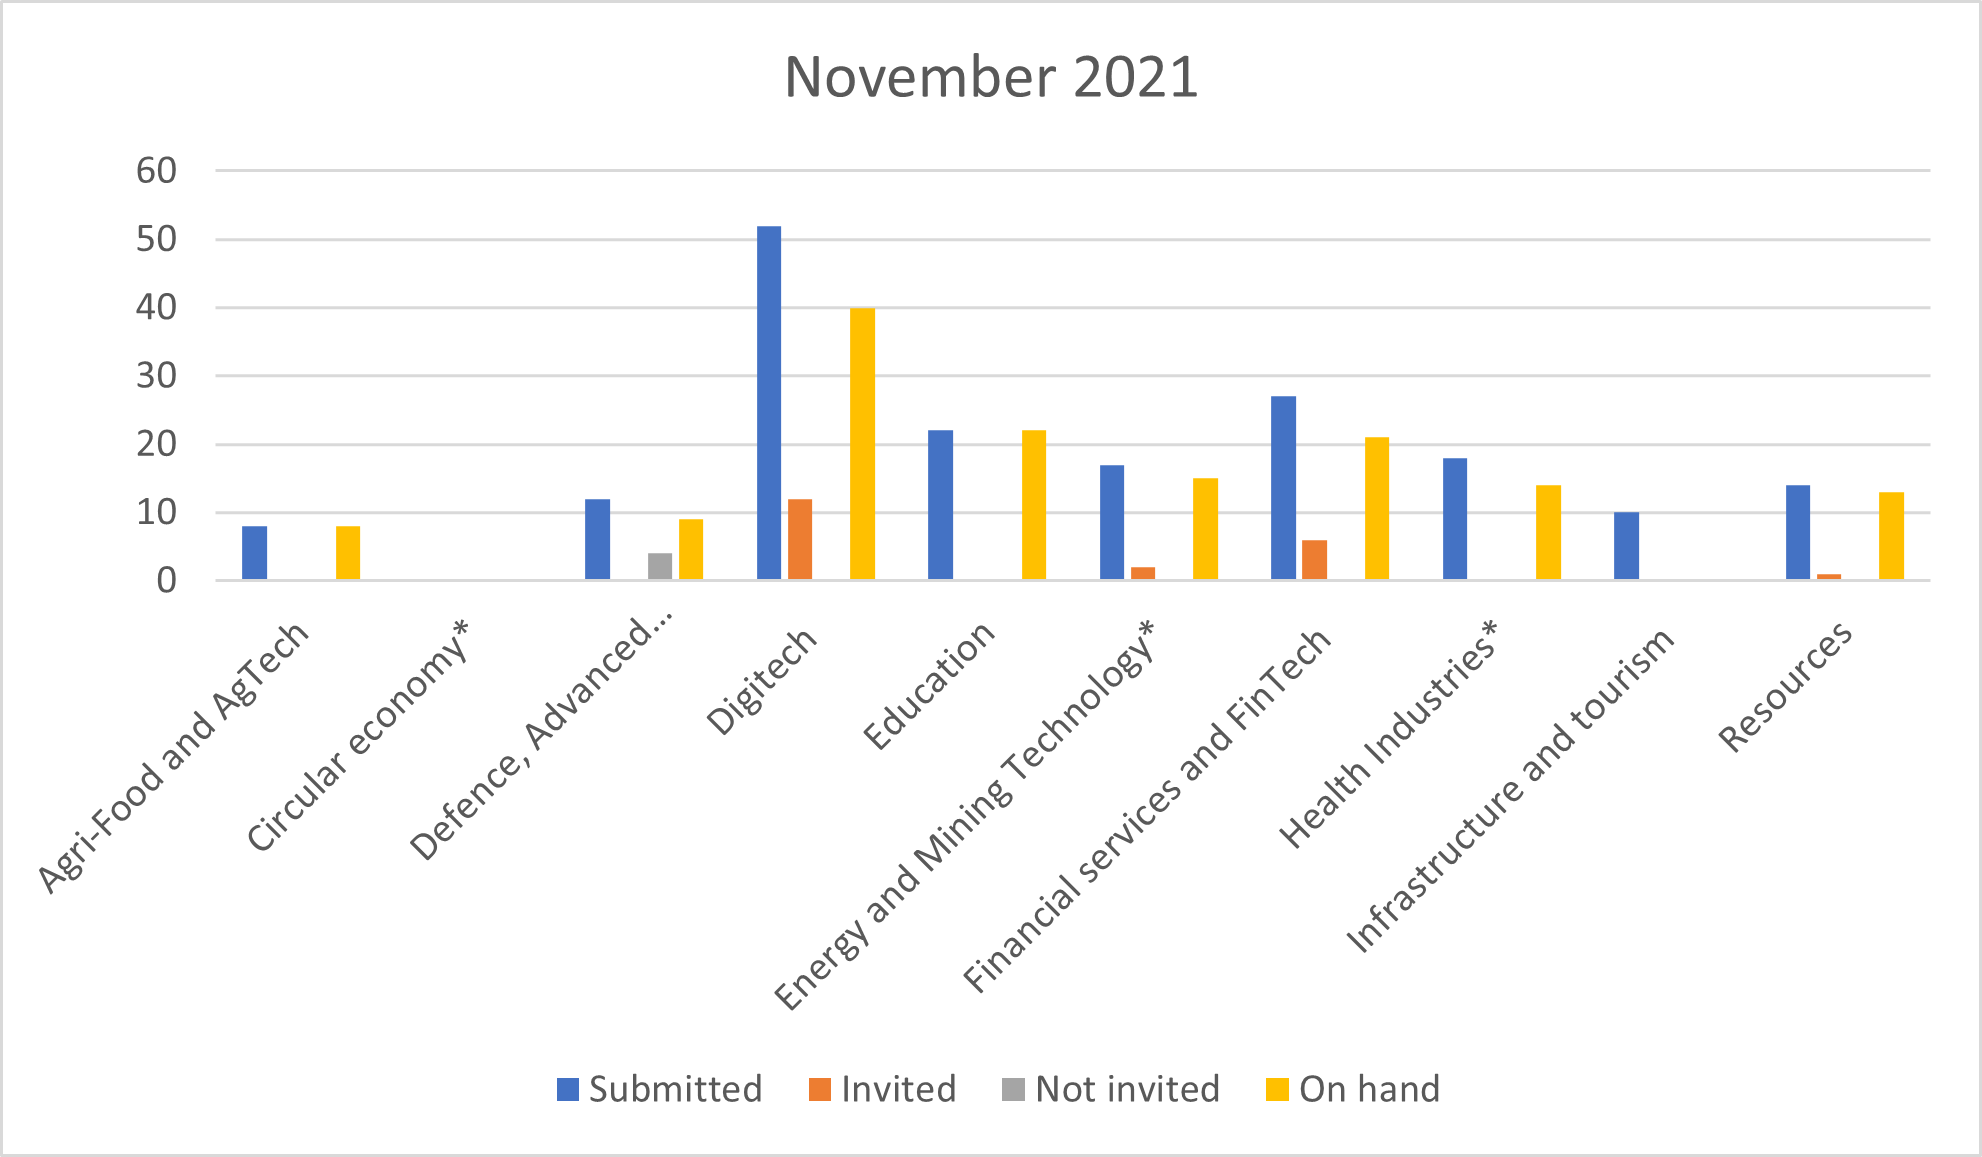 Number of EOIs on hand invited and submitted for global Talent Visa program until November 2021